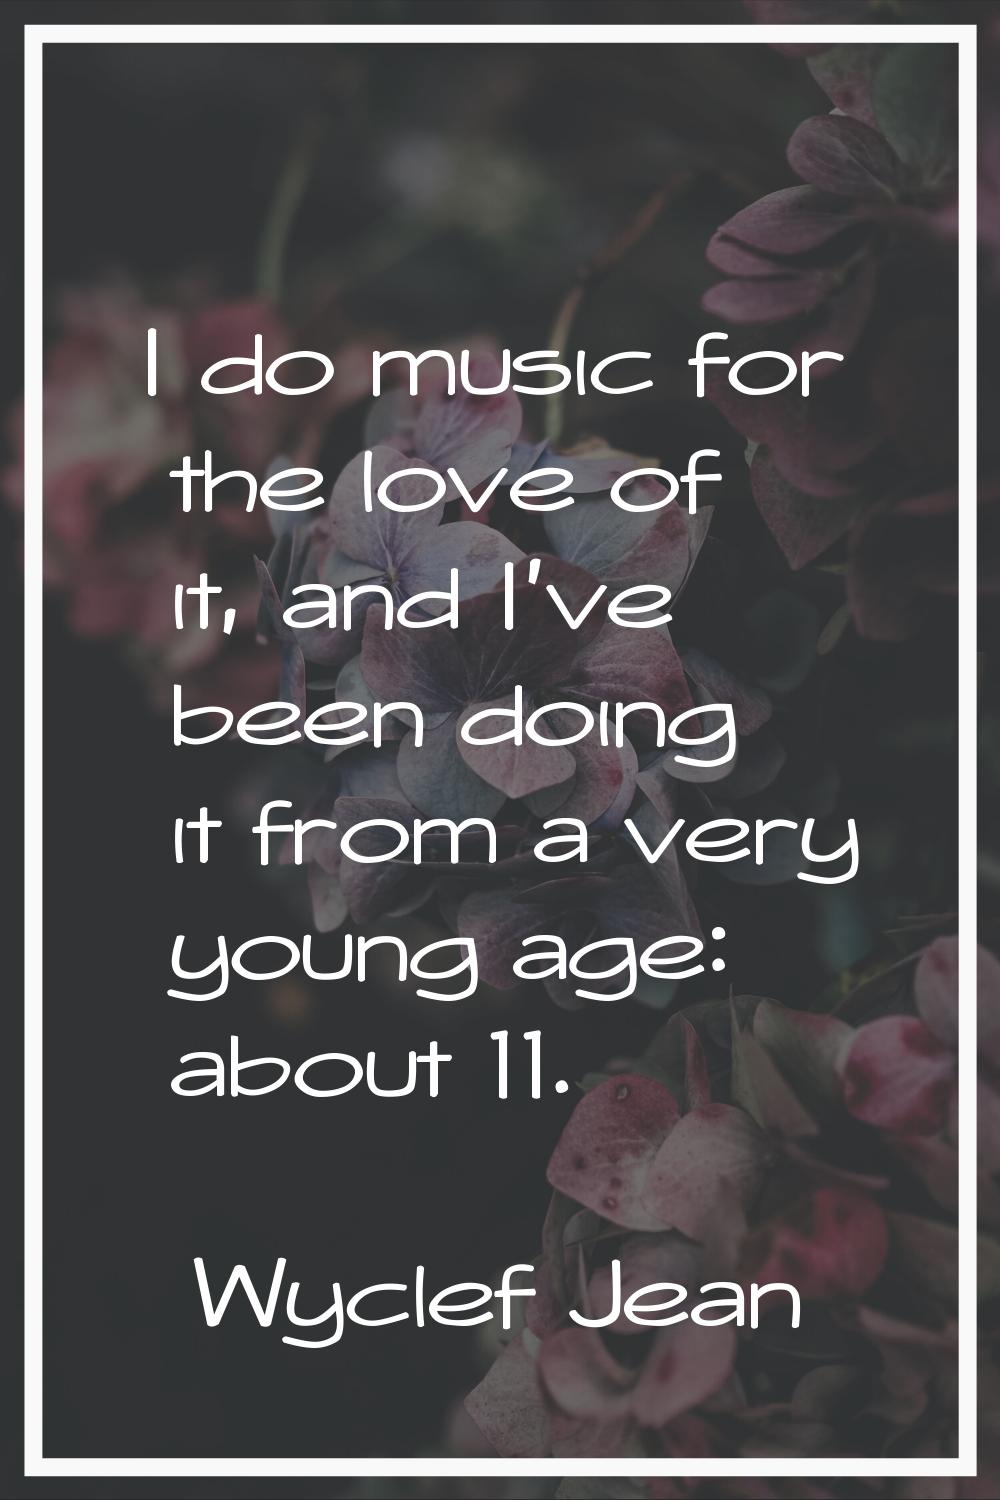 I do music for the love of it, and I've been doing it from a very young age: about 11.